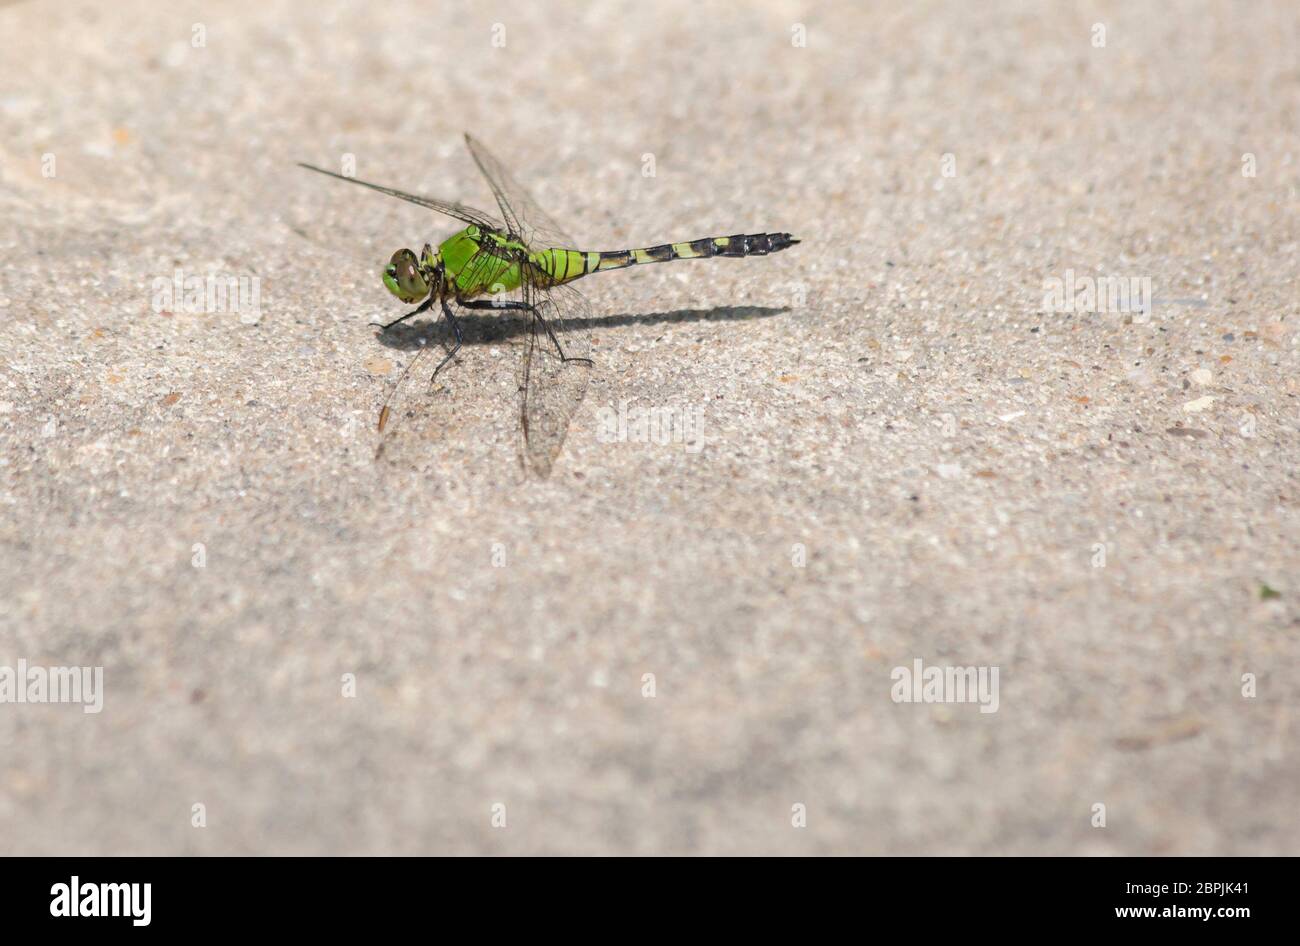 Pondhawk dragonfly that has just landed on a sidewalk Stock Photo